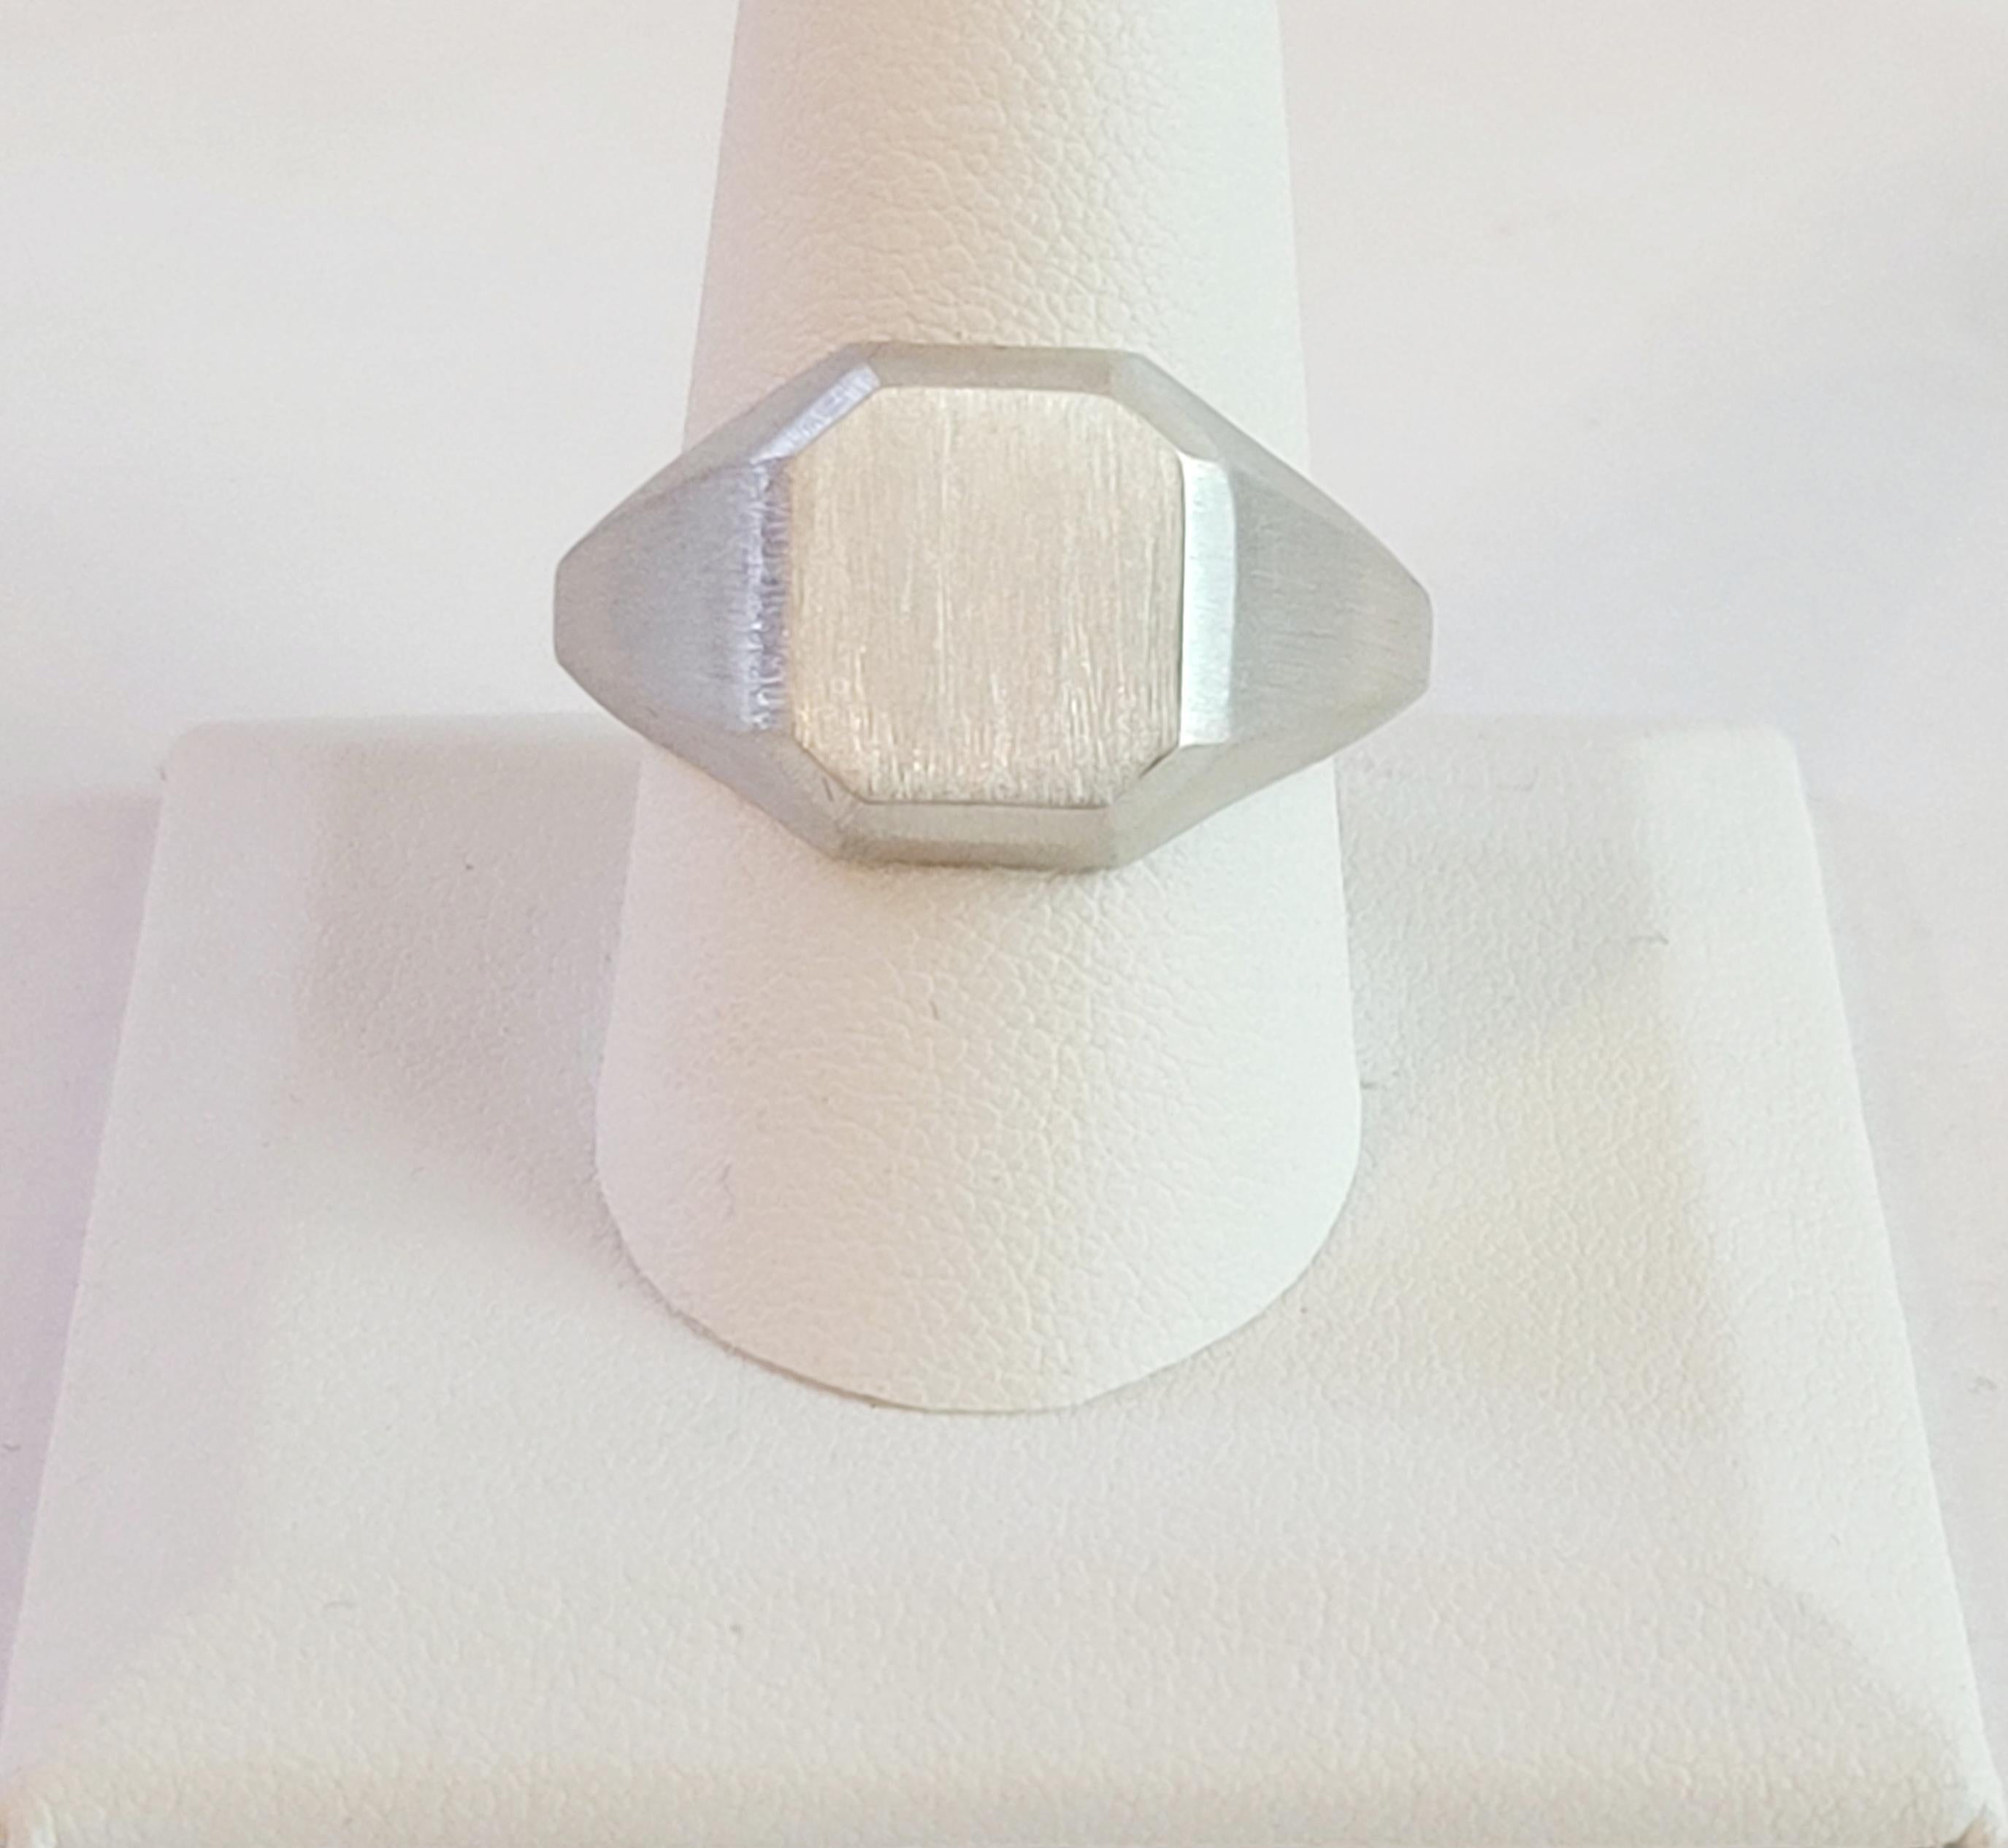 David Yurman Signet Ring
Material Sterling Silver 
Ring Size 10
Ring Weight 15gr 
Gender Men
Condition New, never worn
Ring can be resized
David Yurman Ring box included